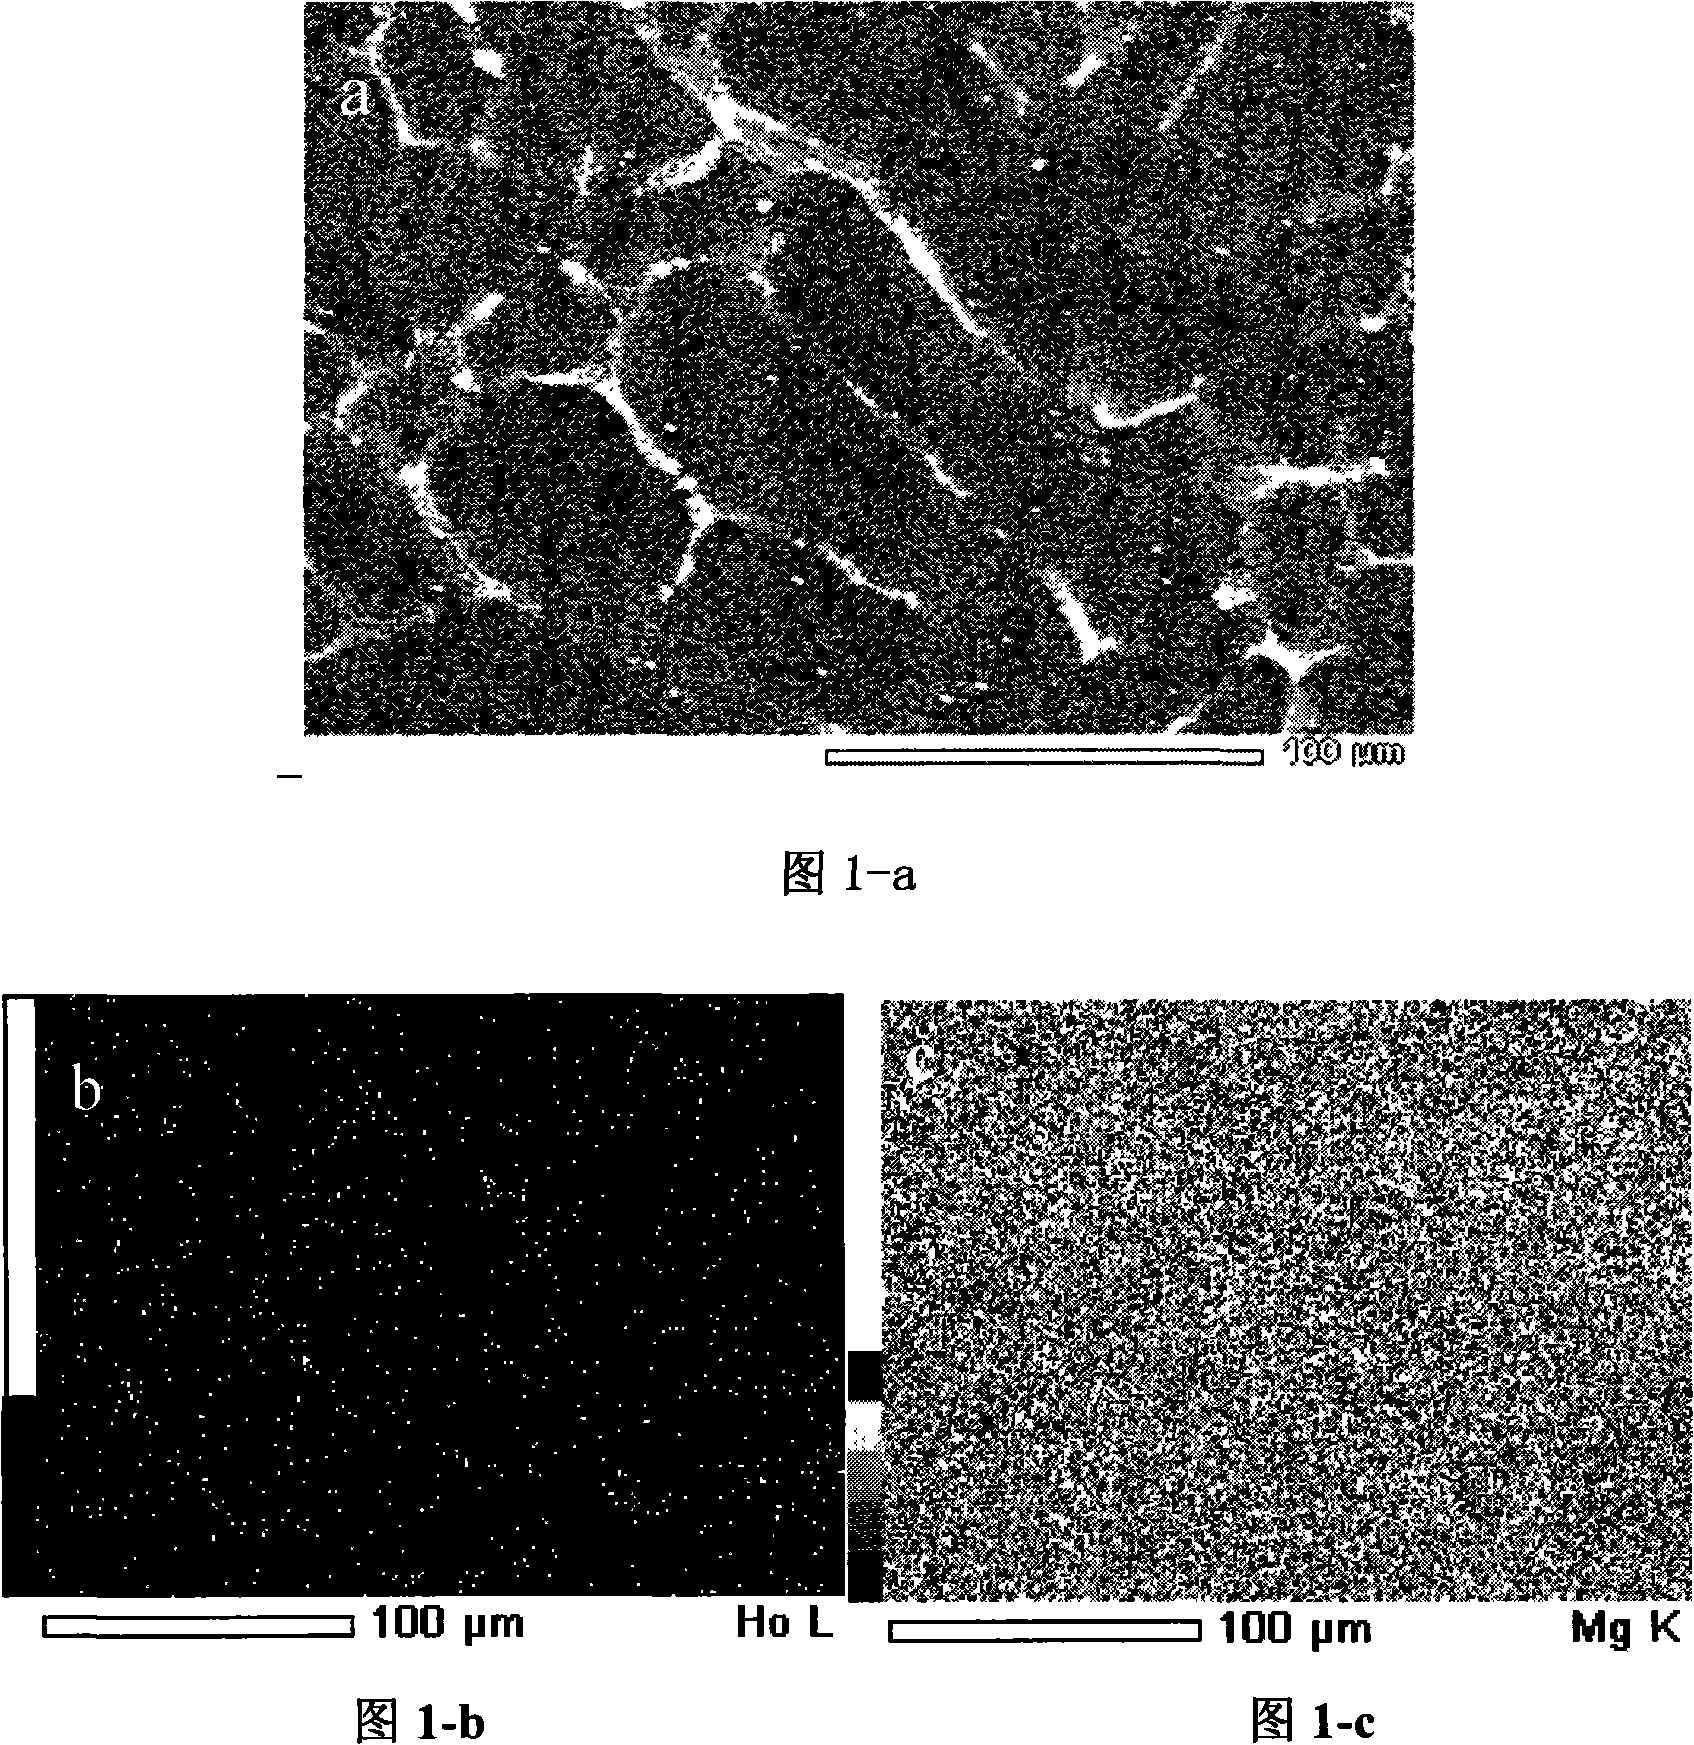 Mg-Li-Ho alloy, and fused salt electrolysis preparation and apparatus thereof